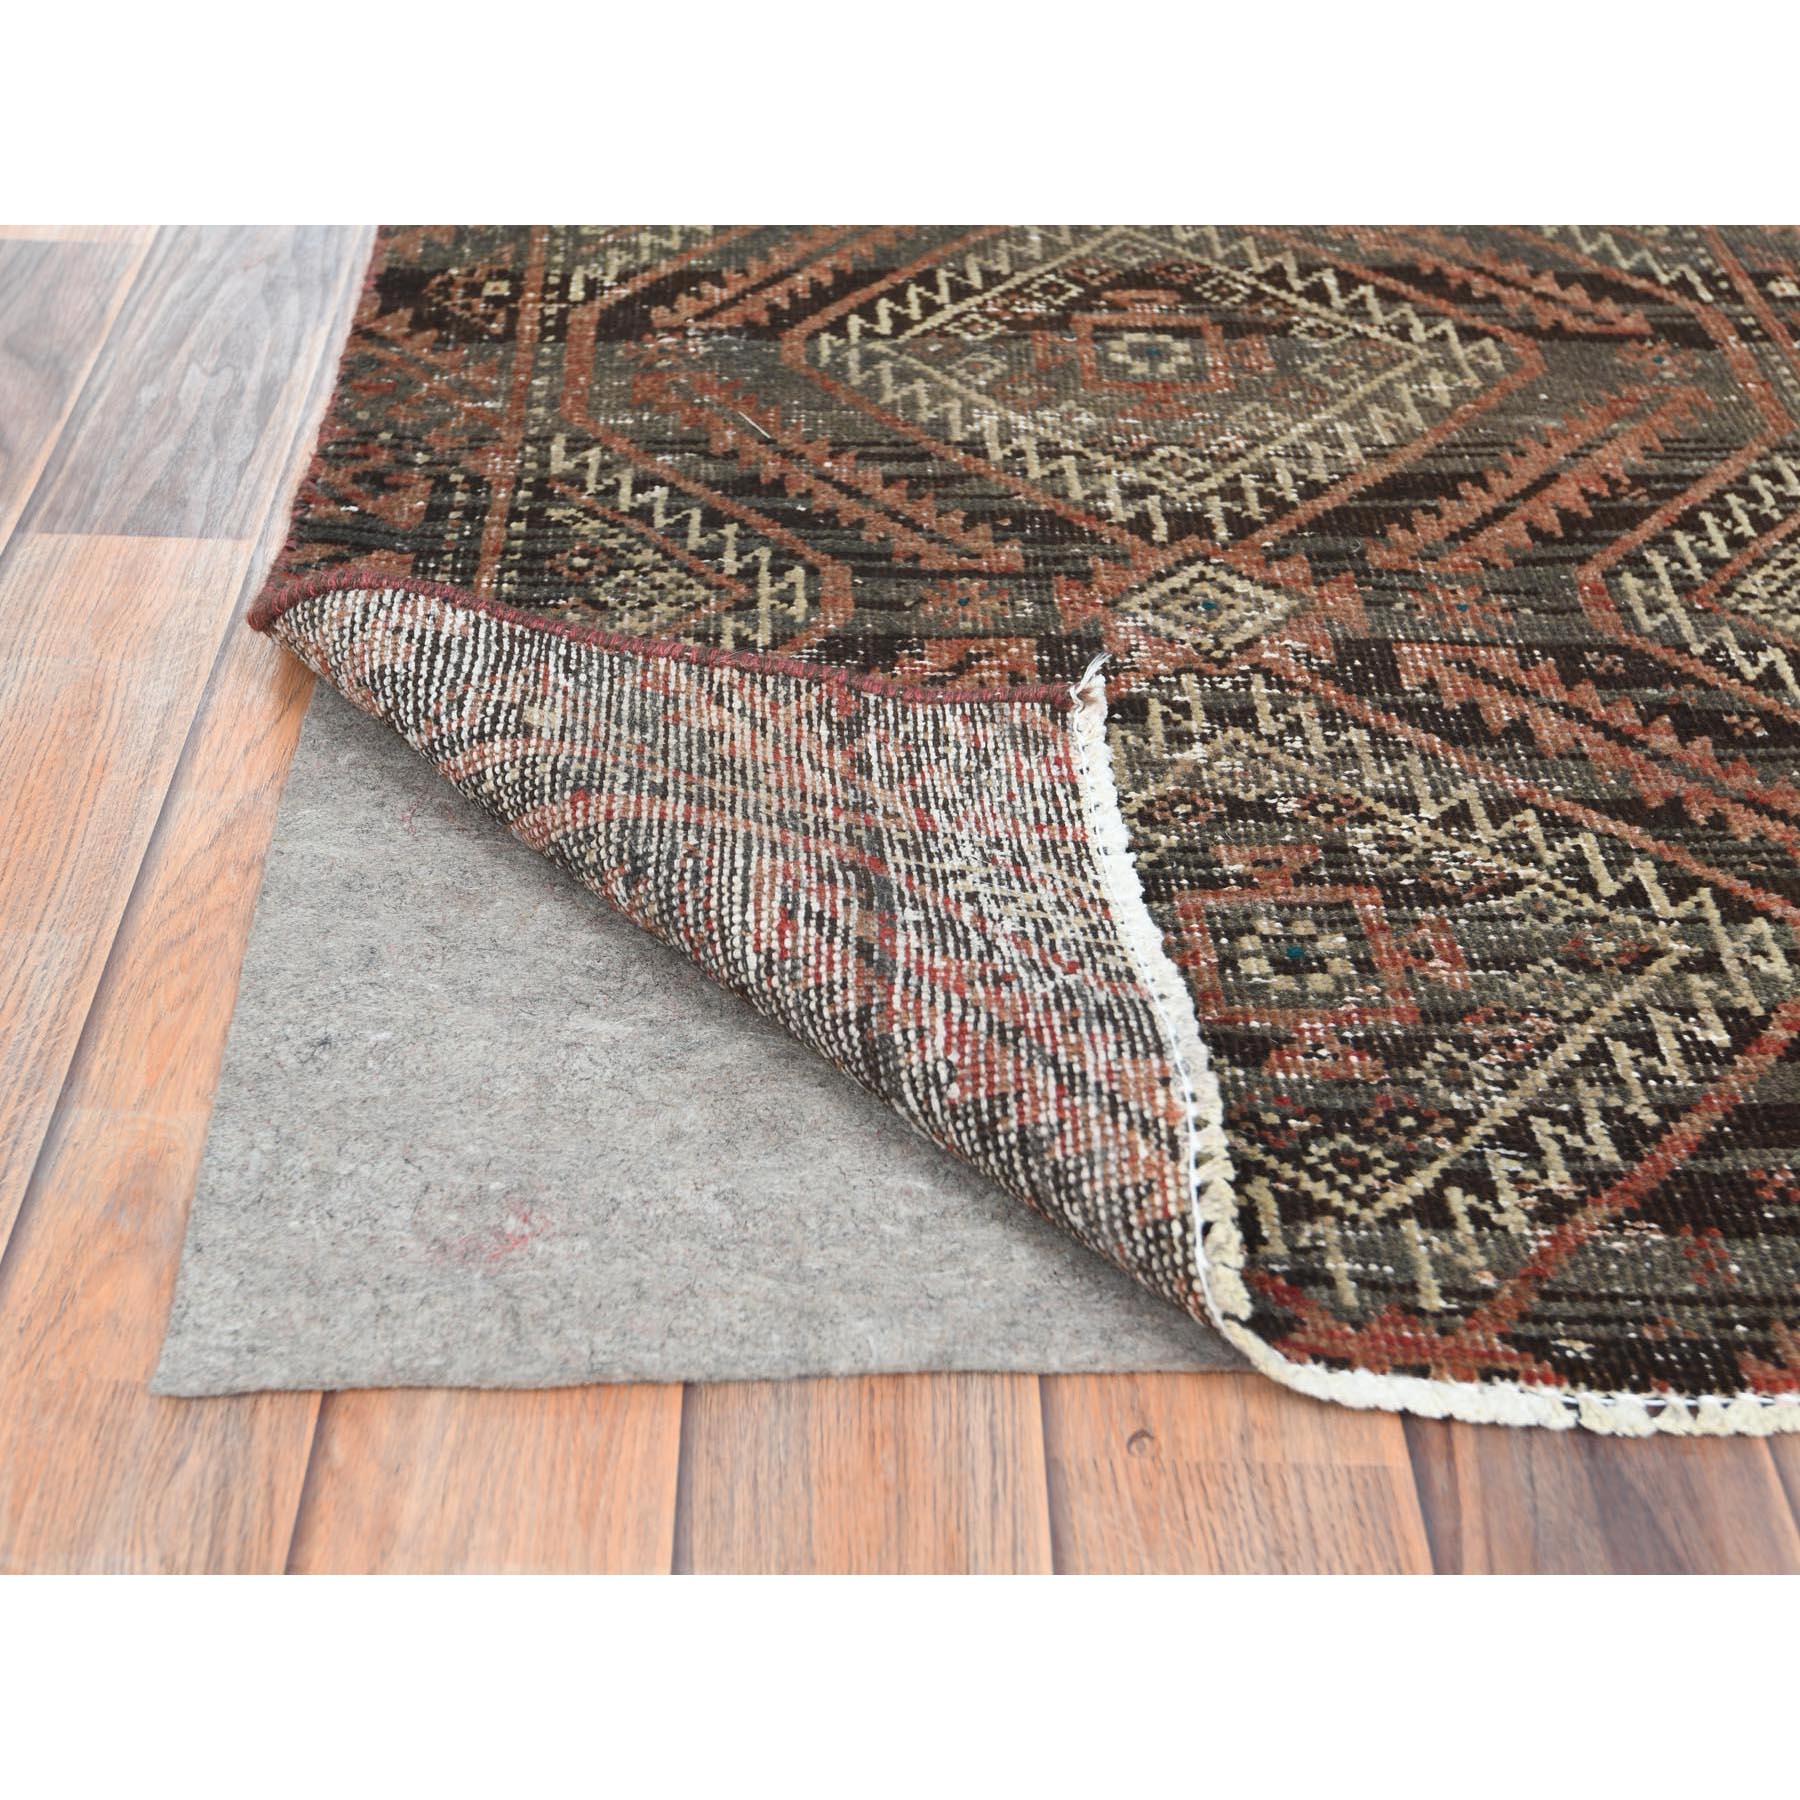 Medieval Brown Worn Down Wool Hand Knotted Bohemian Vintage Persian Baluch Runner Rug